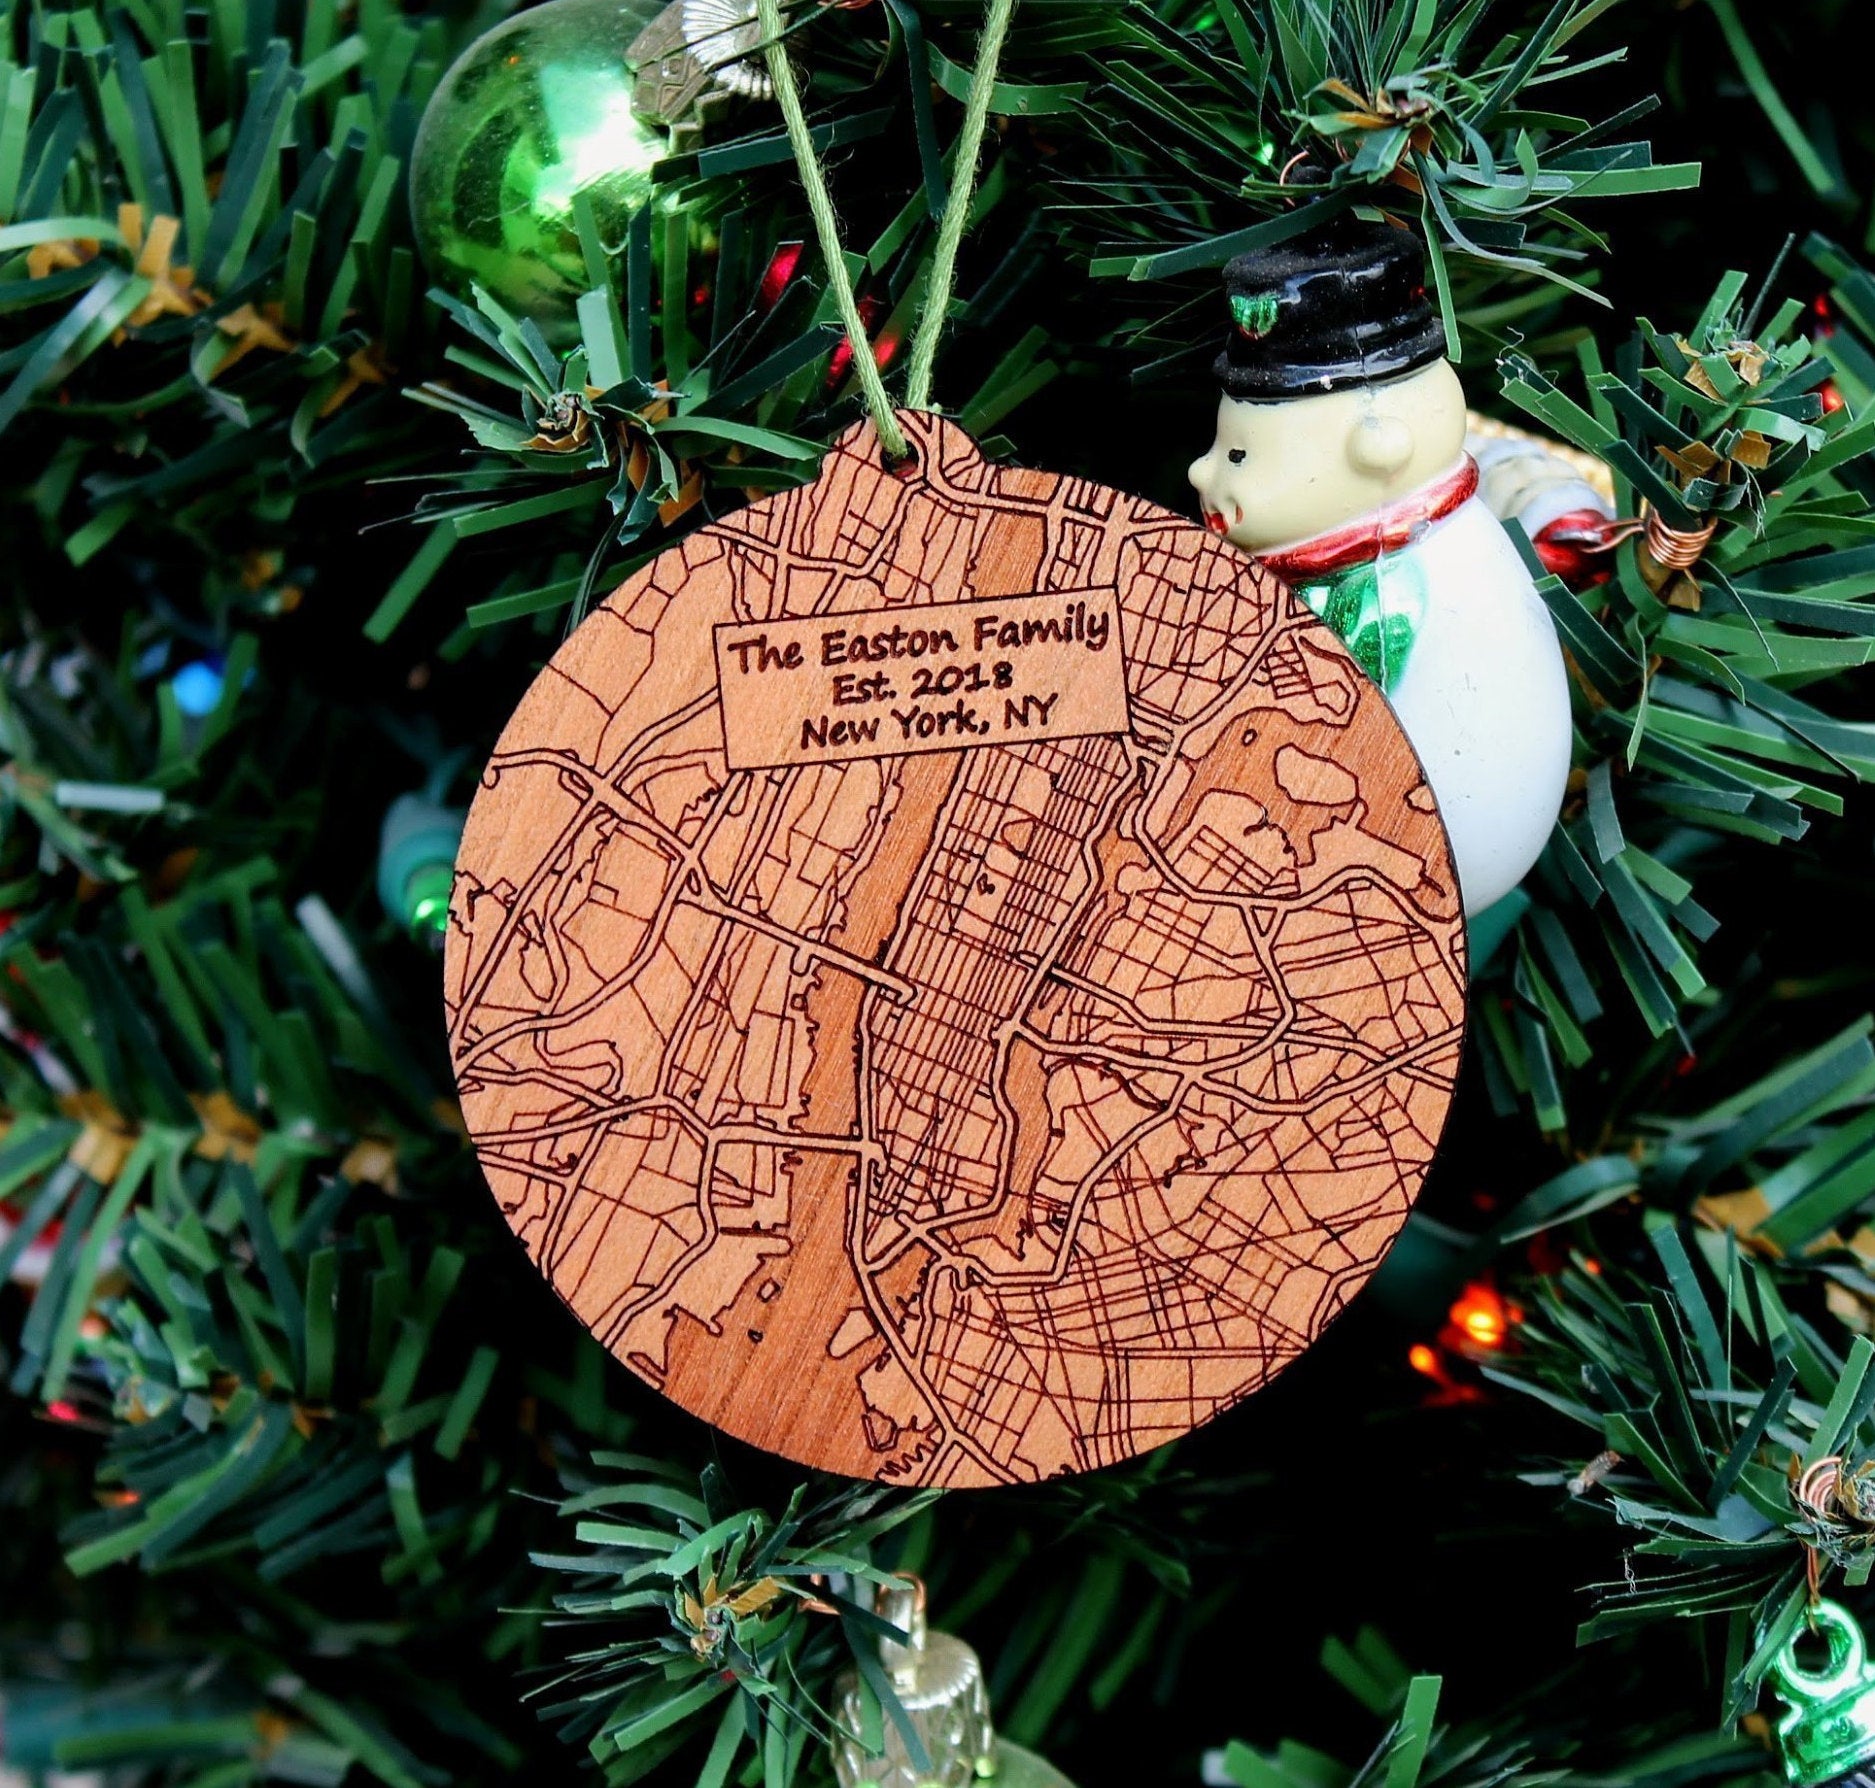 NY 2018 Handcrafted Glitter Christmas Ornament Gift New York 